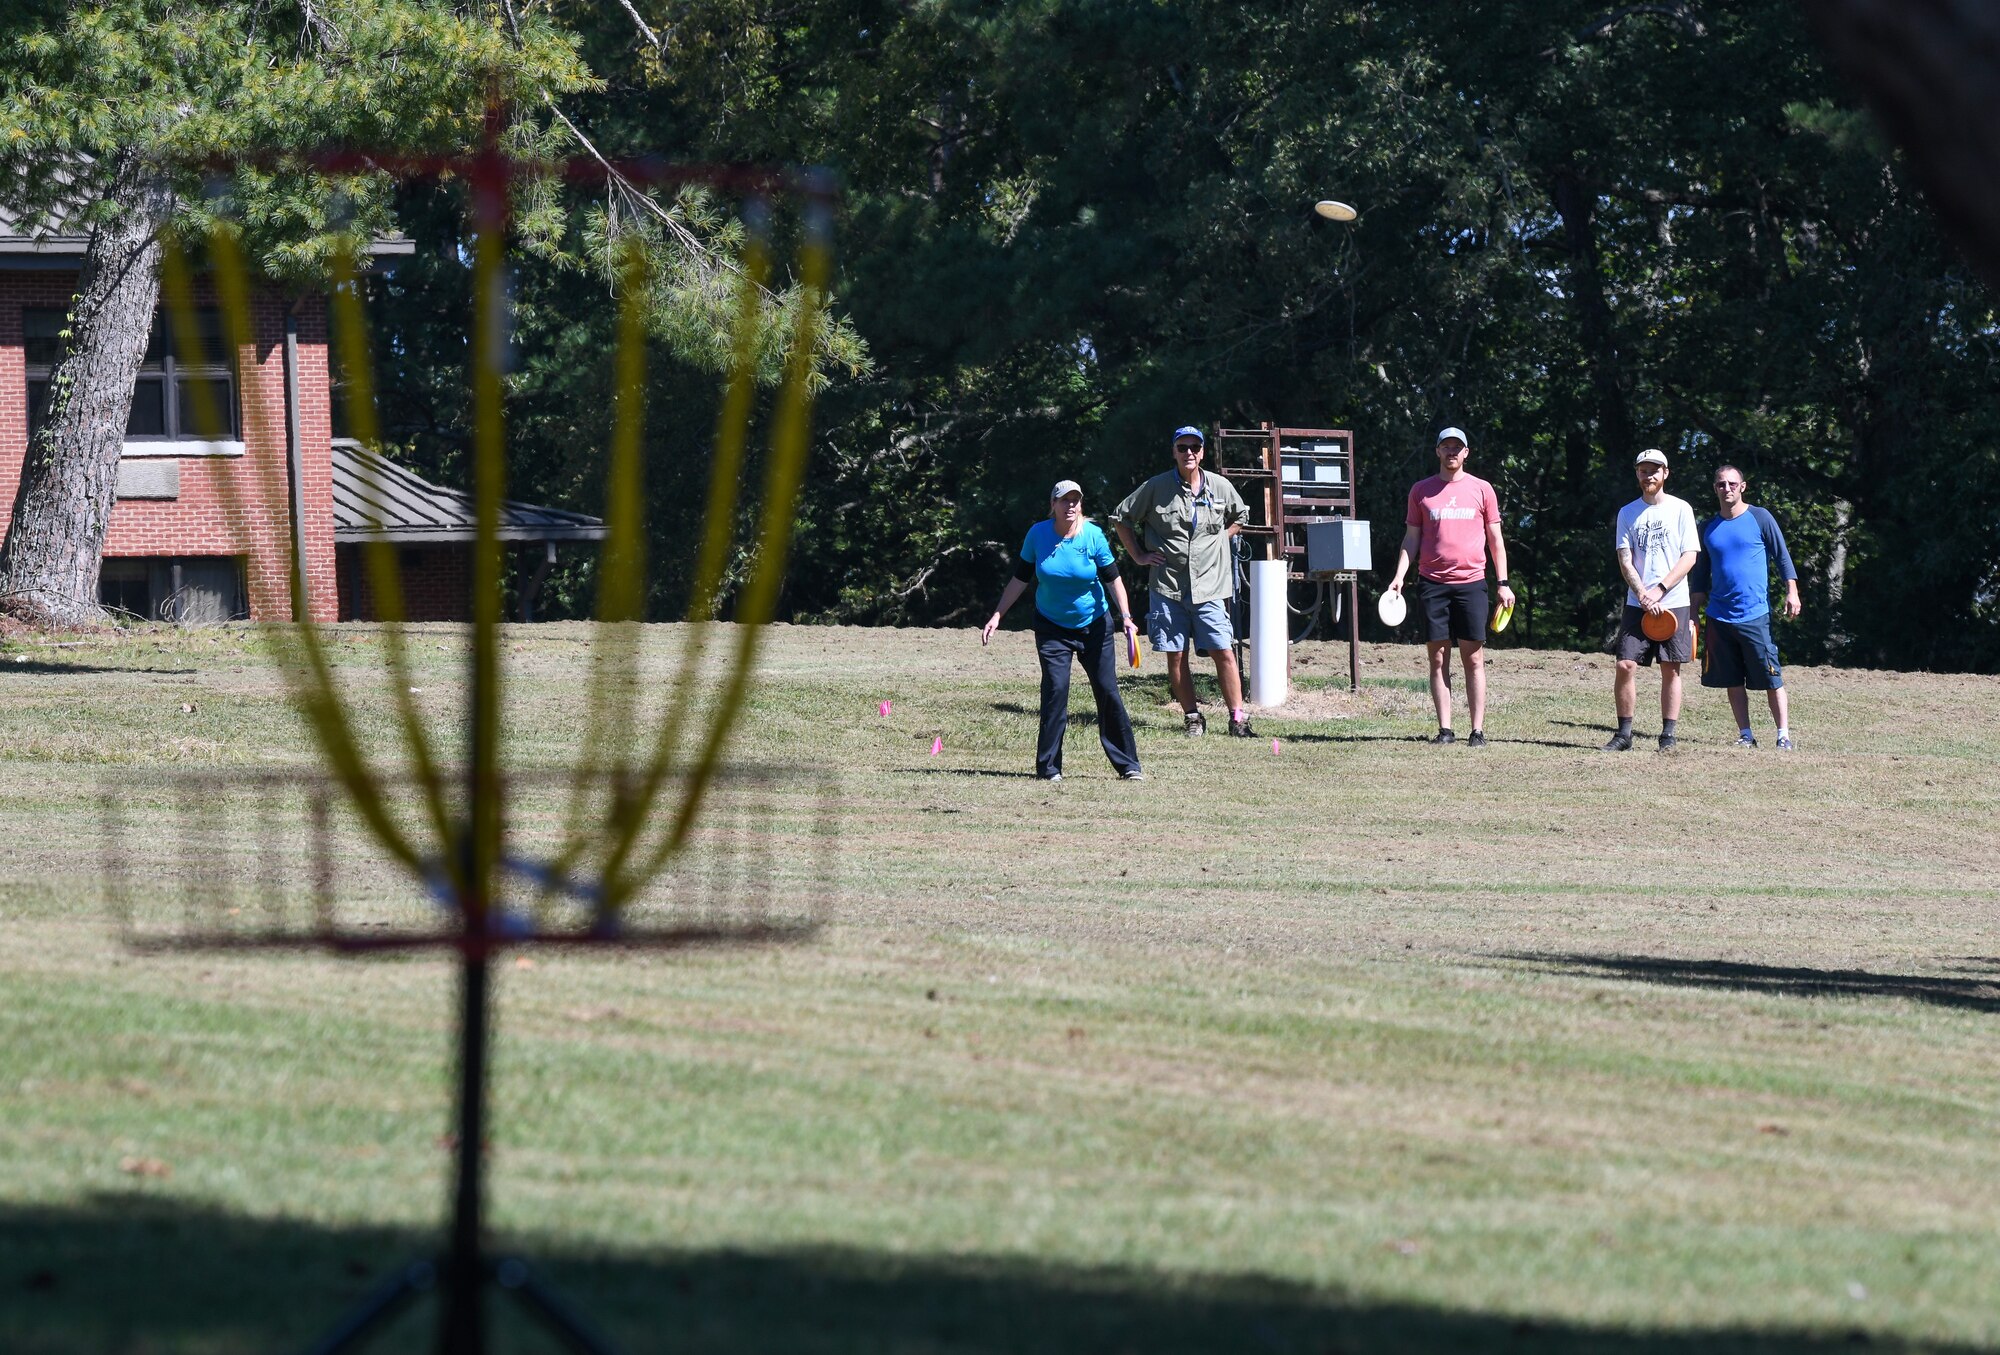 Woman watches her disc fly while playing disc golf as others wait their turn